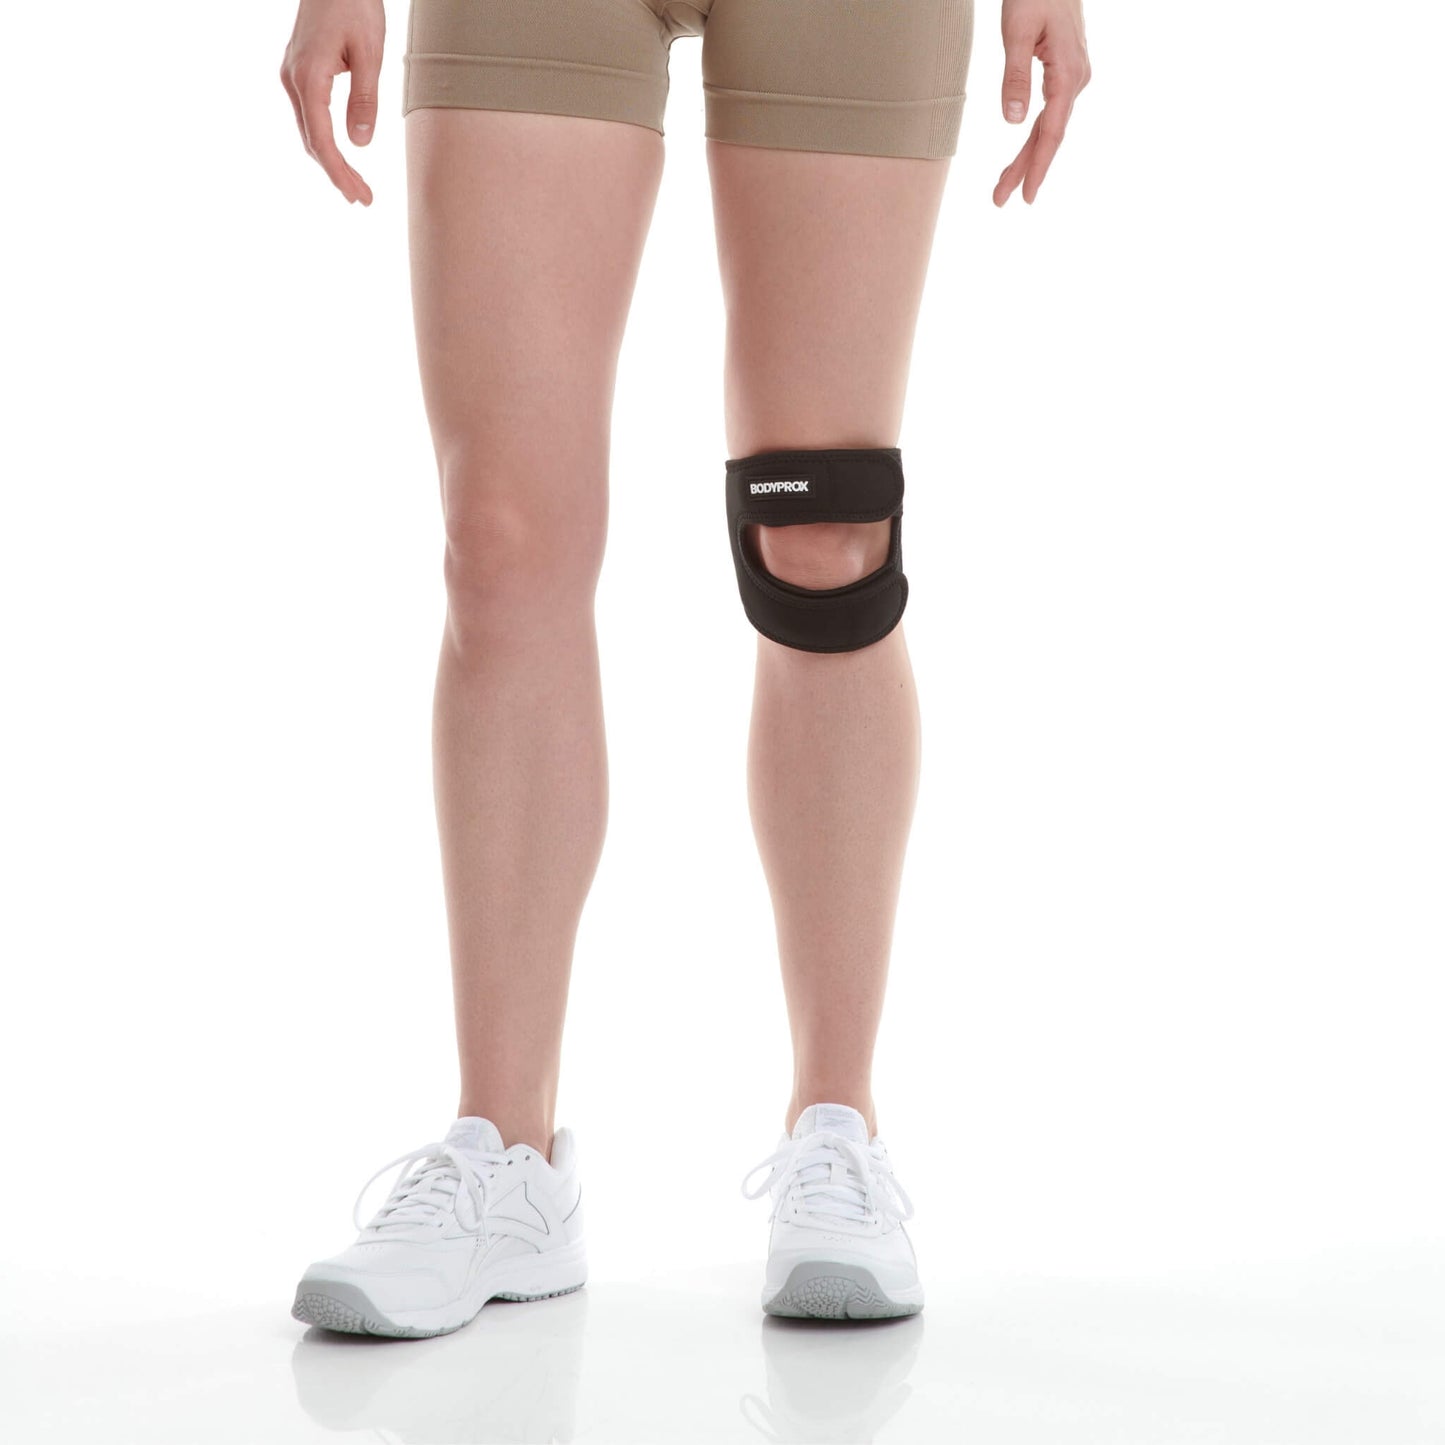 Rebomer Patella Knee Strap with 3D Silicone Insert for Joint Pain Relief &  Stability | Adjustable Brace for Running, Sports & Exercise